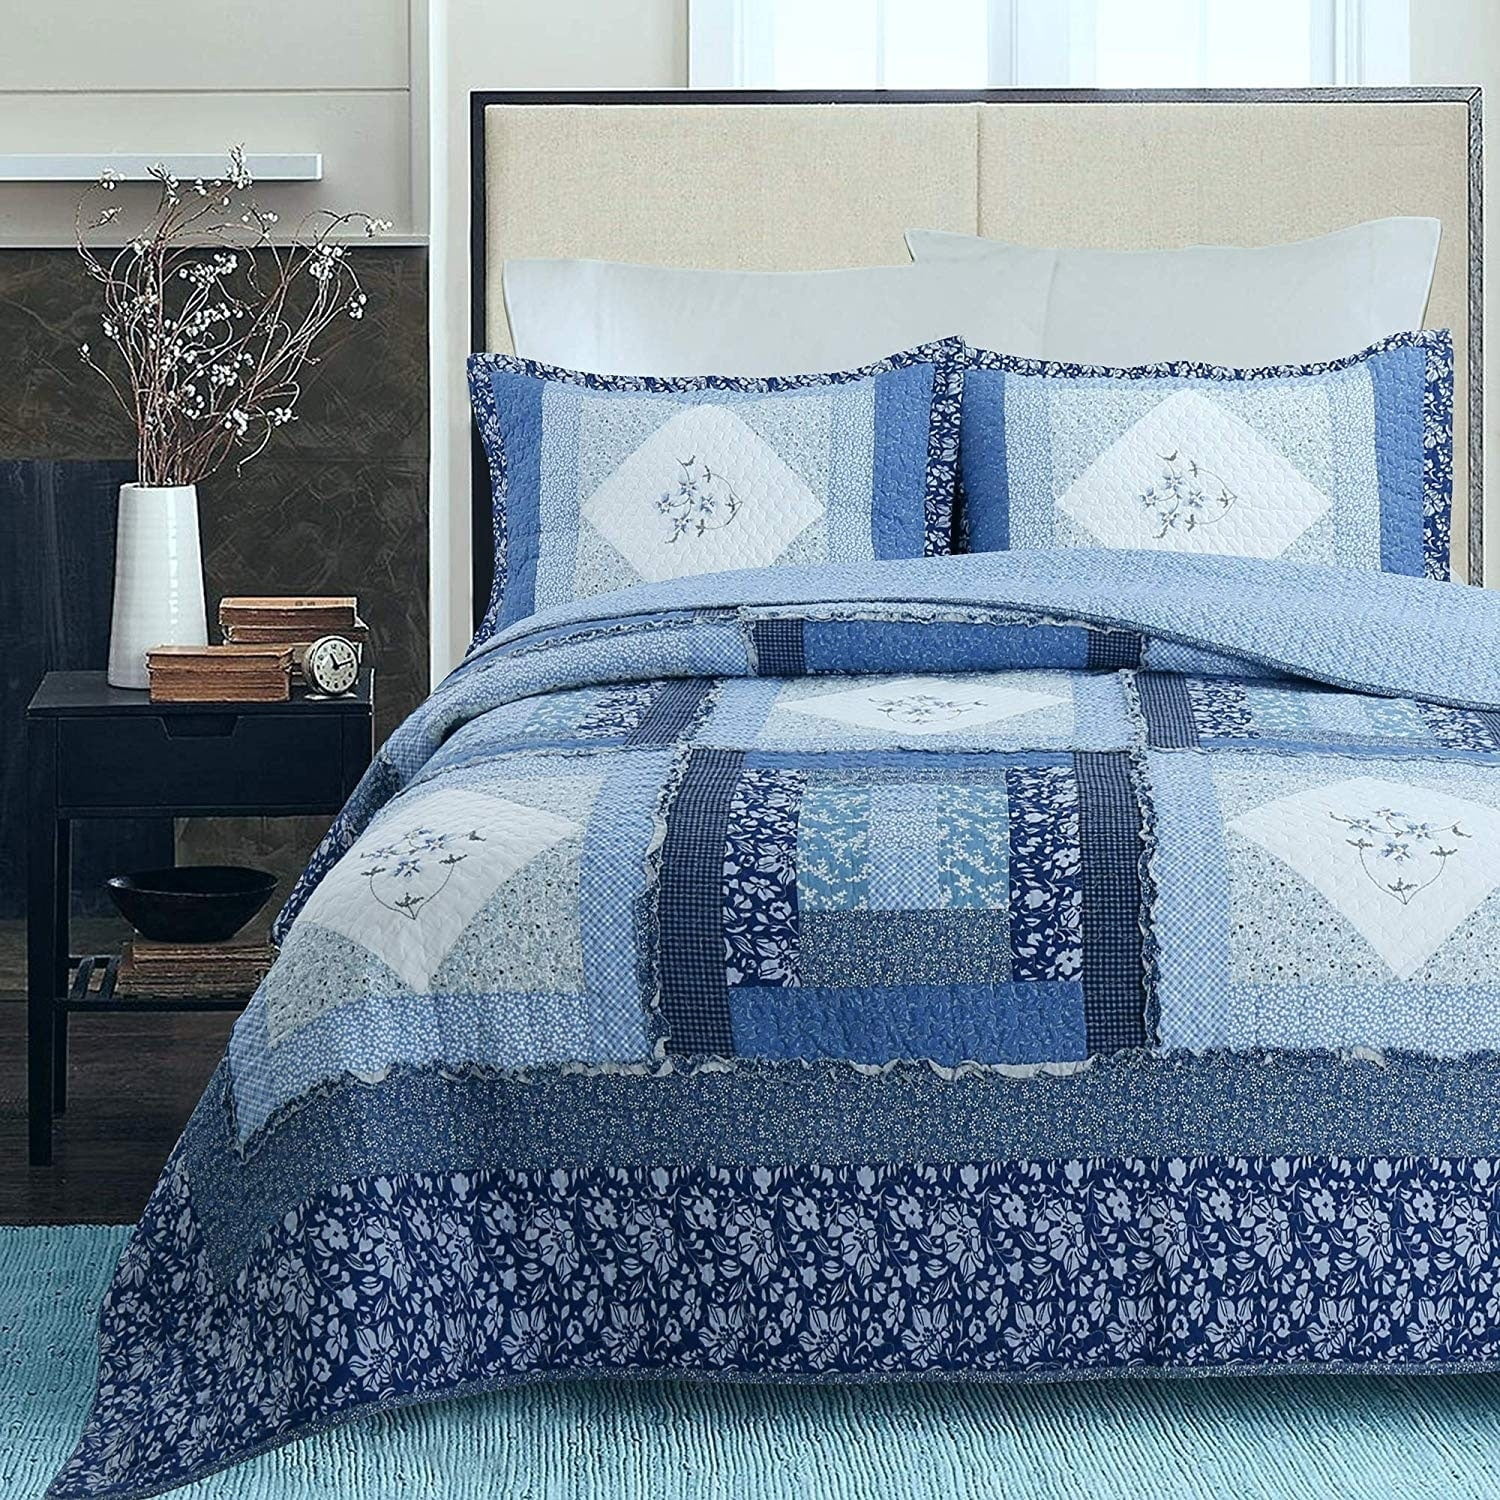 Details about  / Luxury Home Collection Quilted Reversible Coverlet Bedspread Set Floral Printed